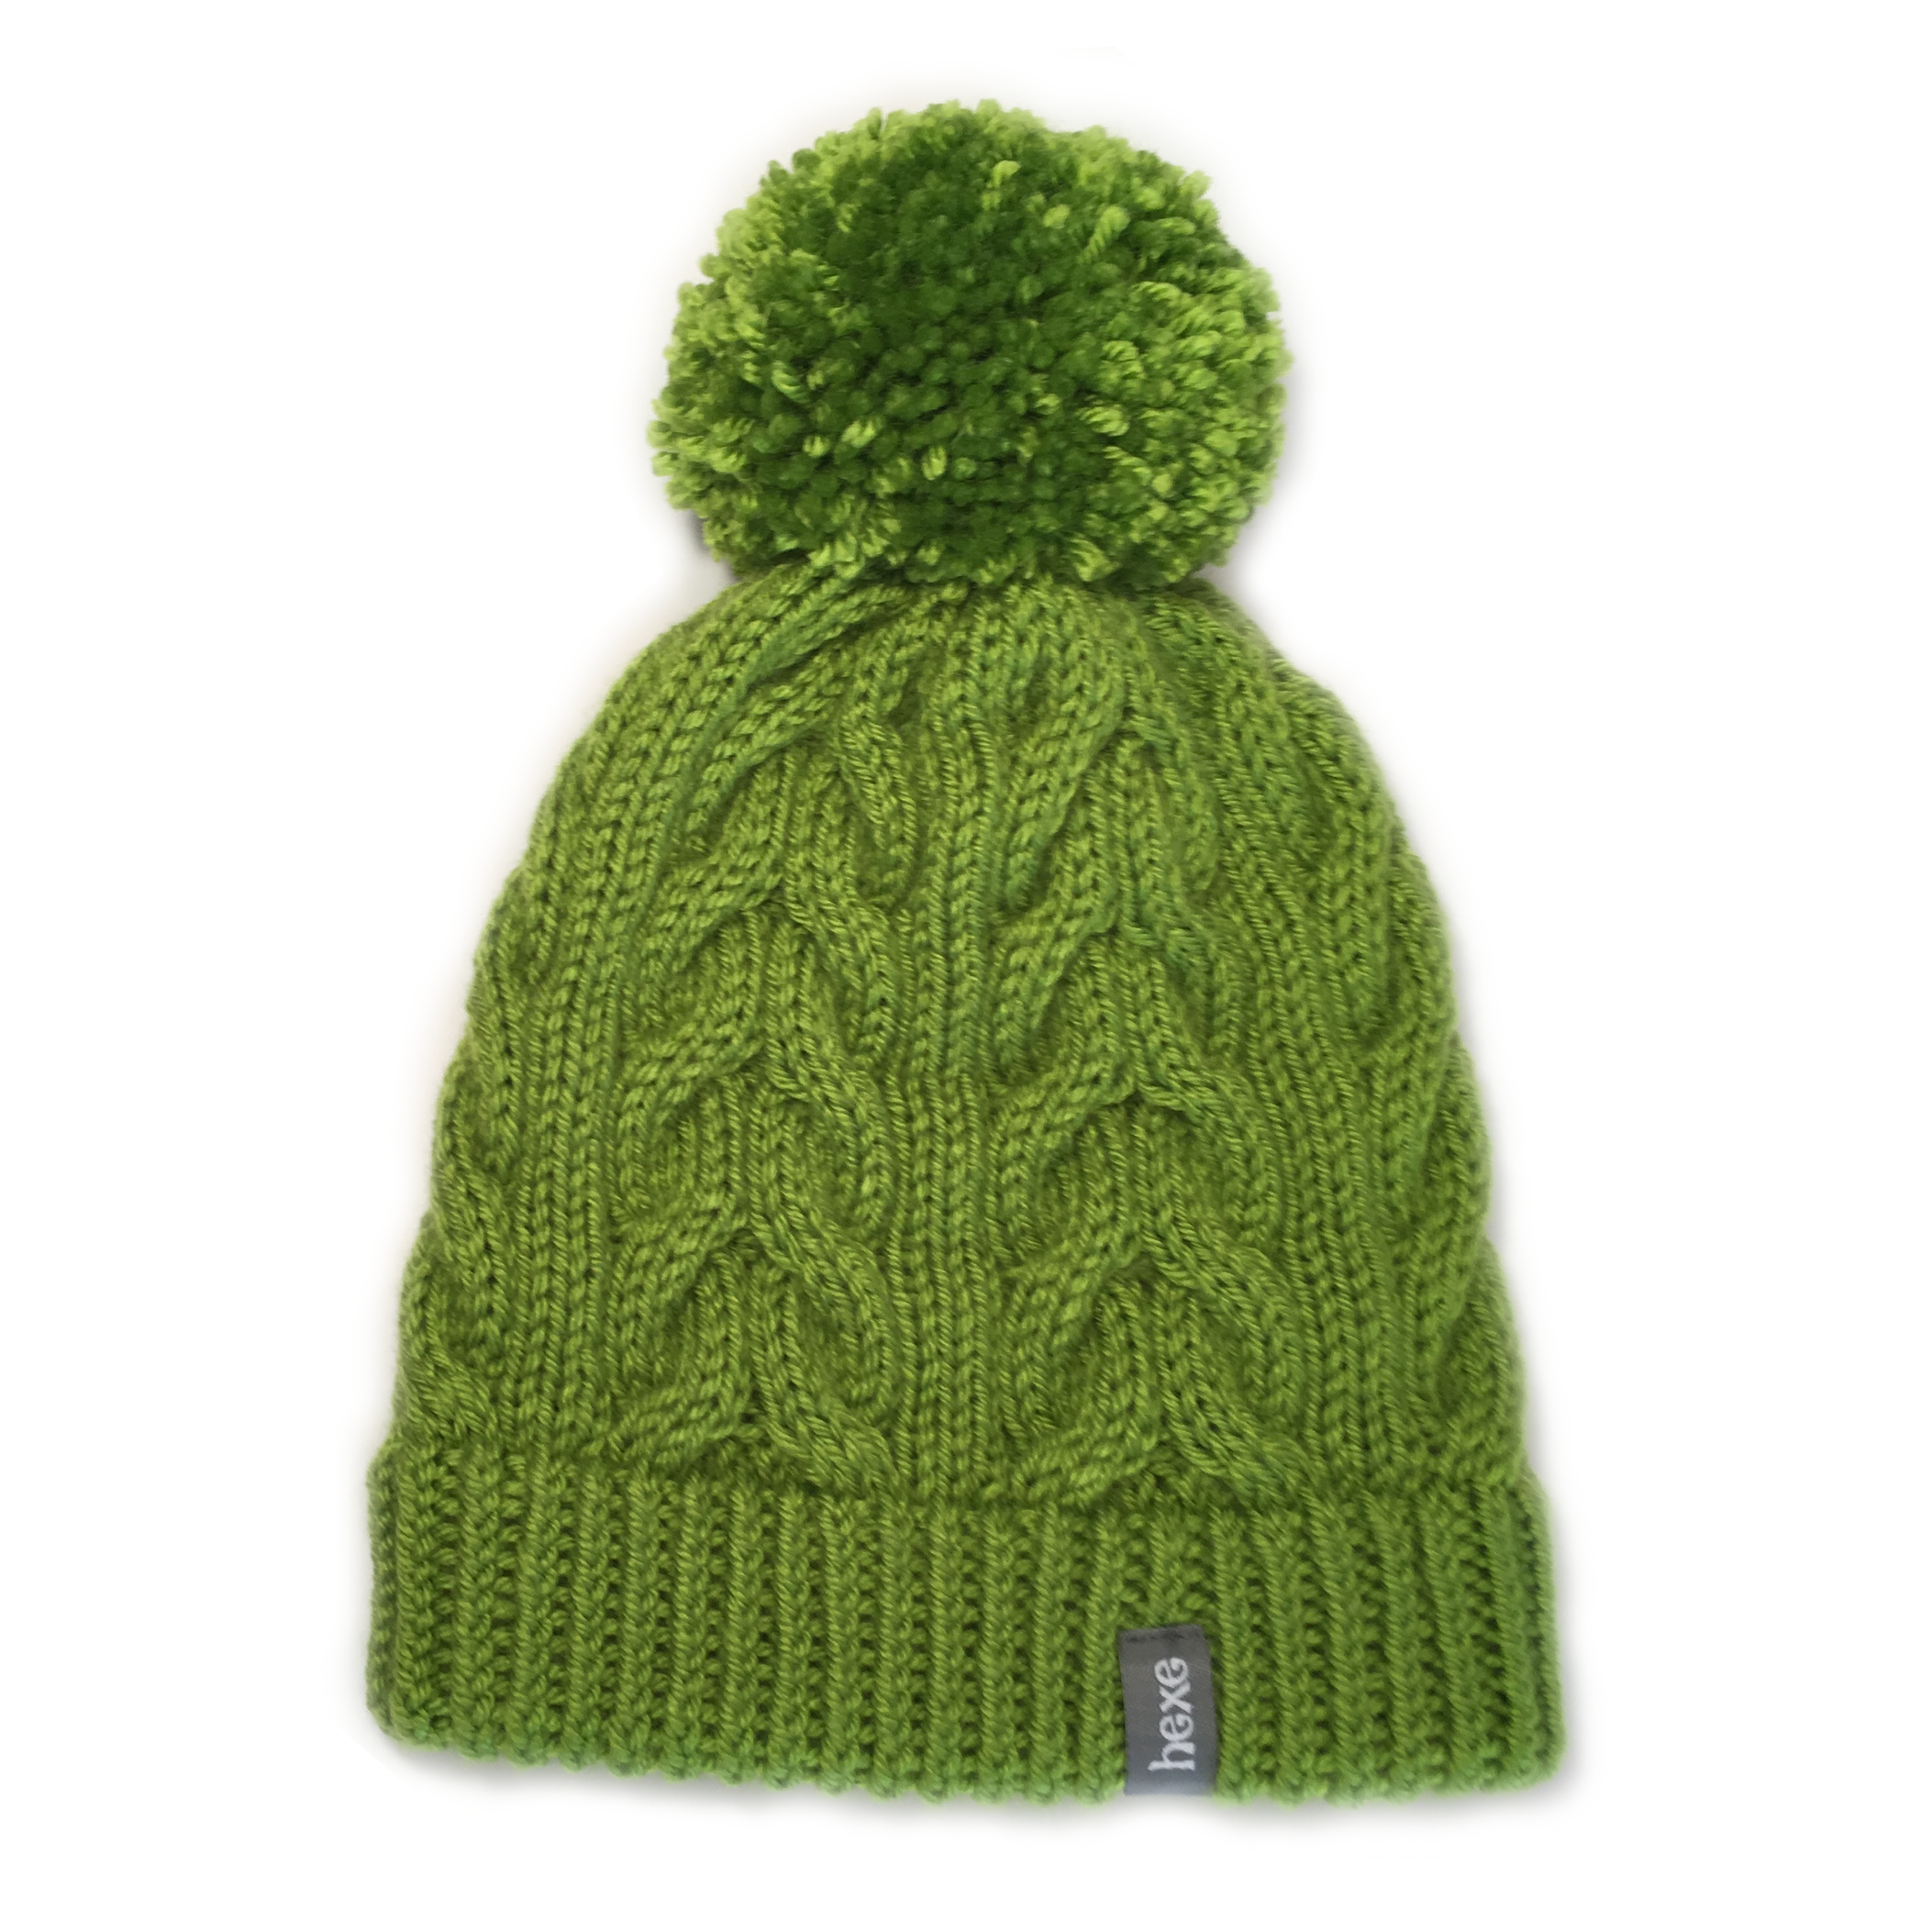 Hand-knit pom beanie. Great for skiing and snowboarding. Cupcake - HexeKnits.com